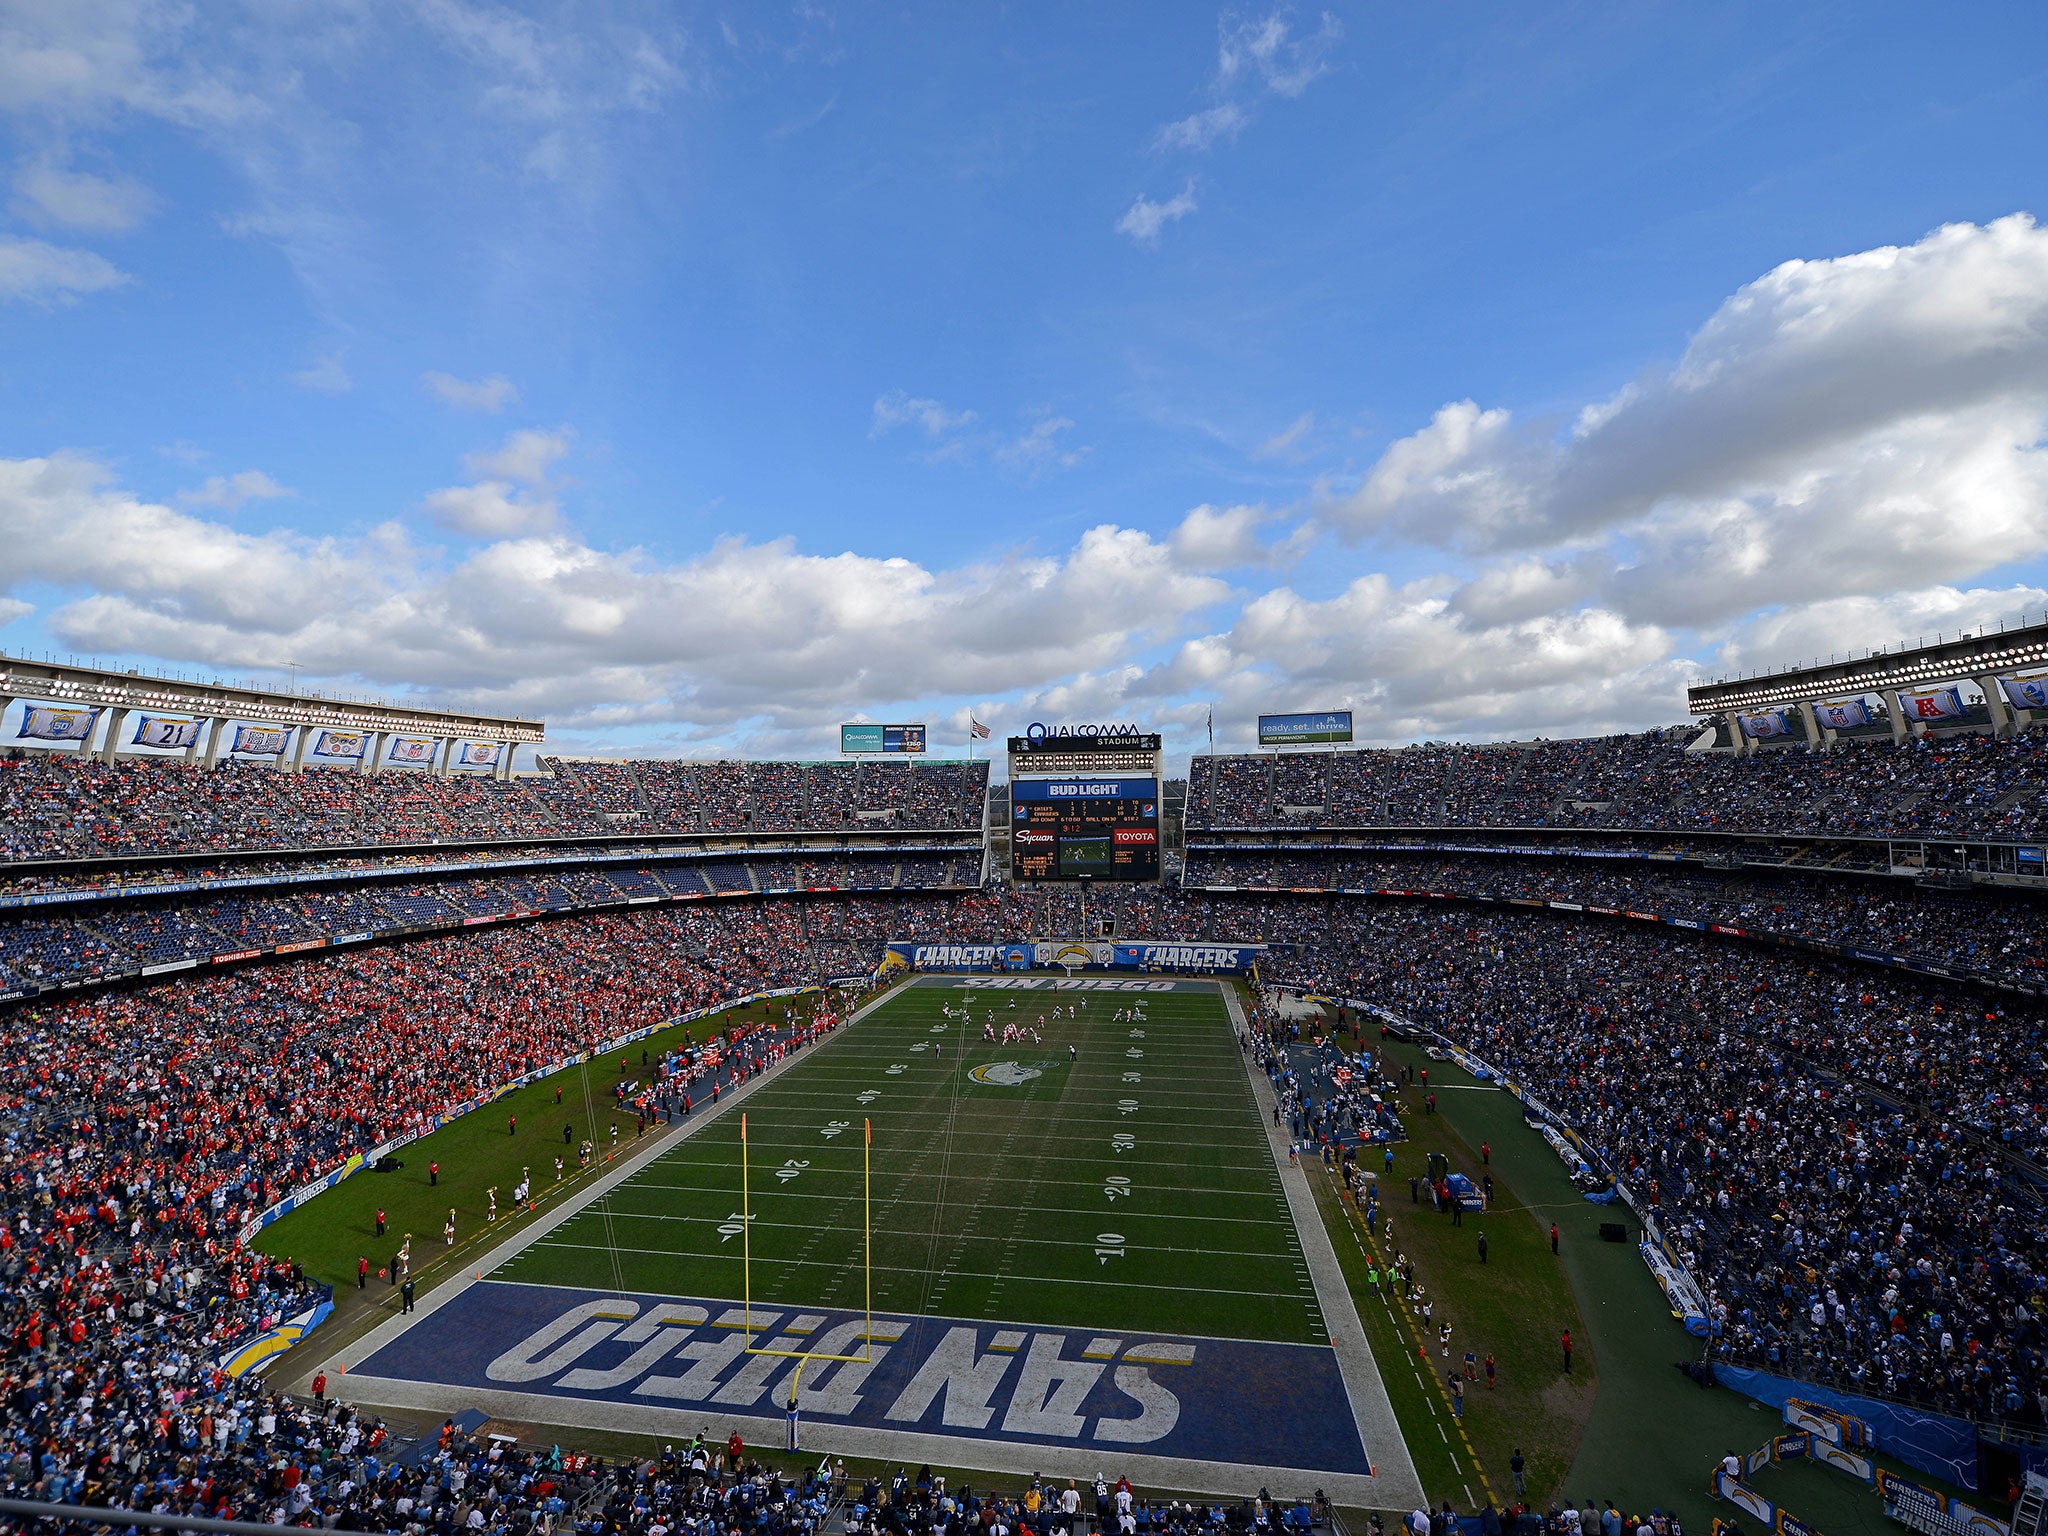 A general view of the San Diego Chargers' Qualcomm Stadium